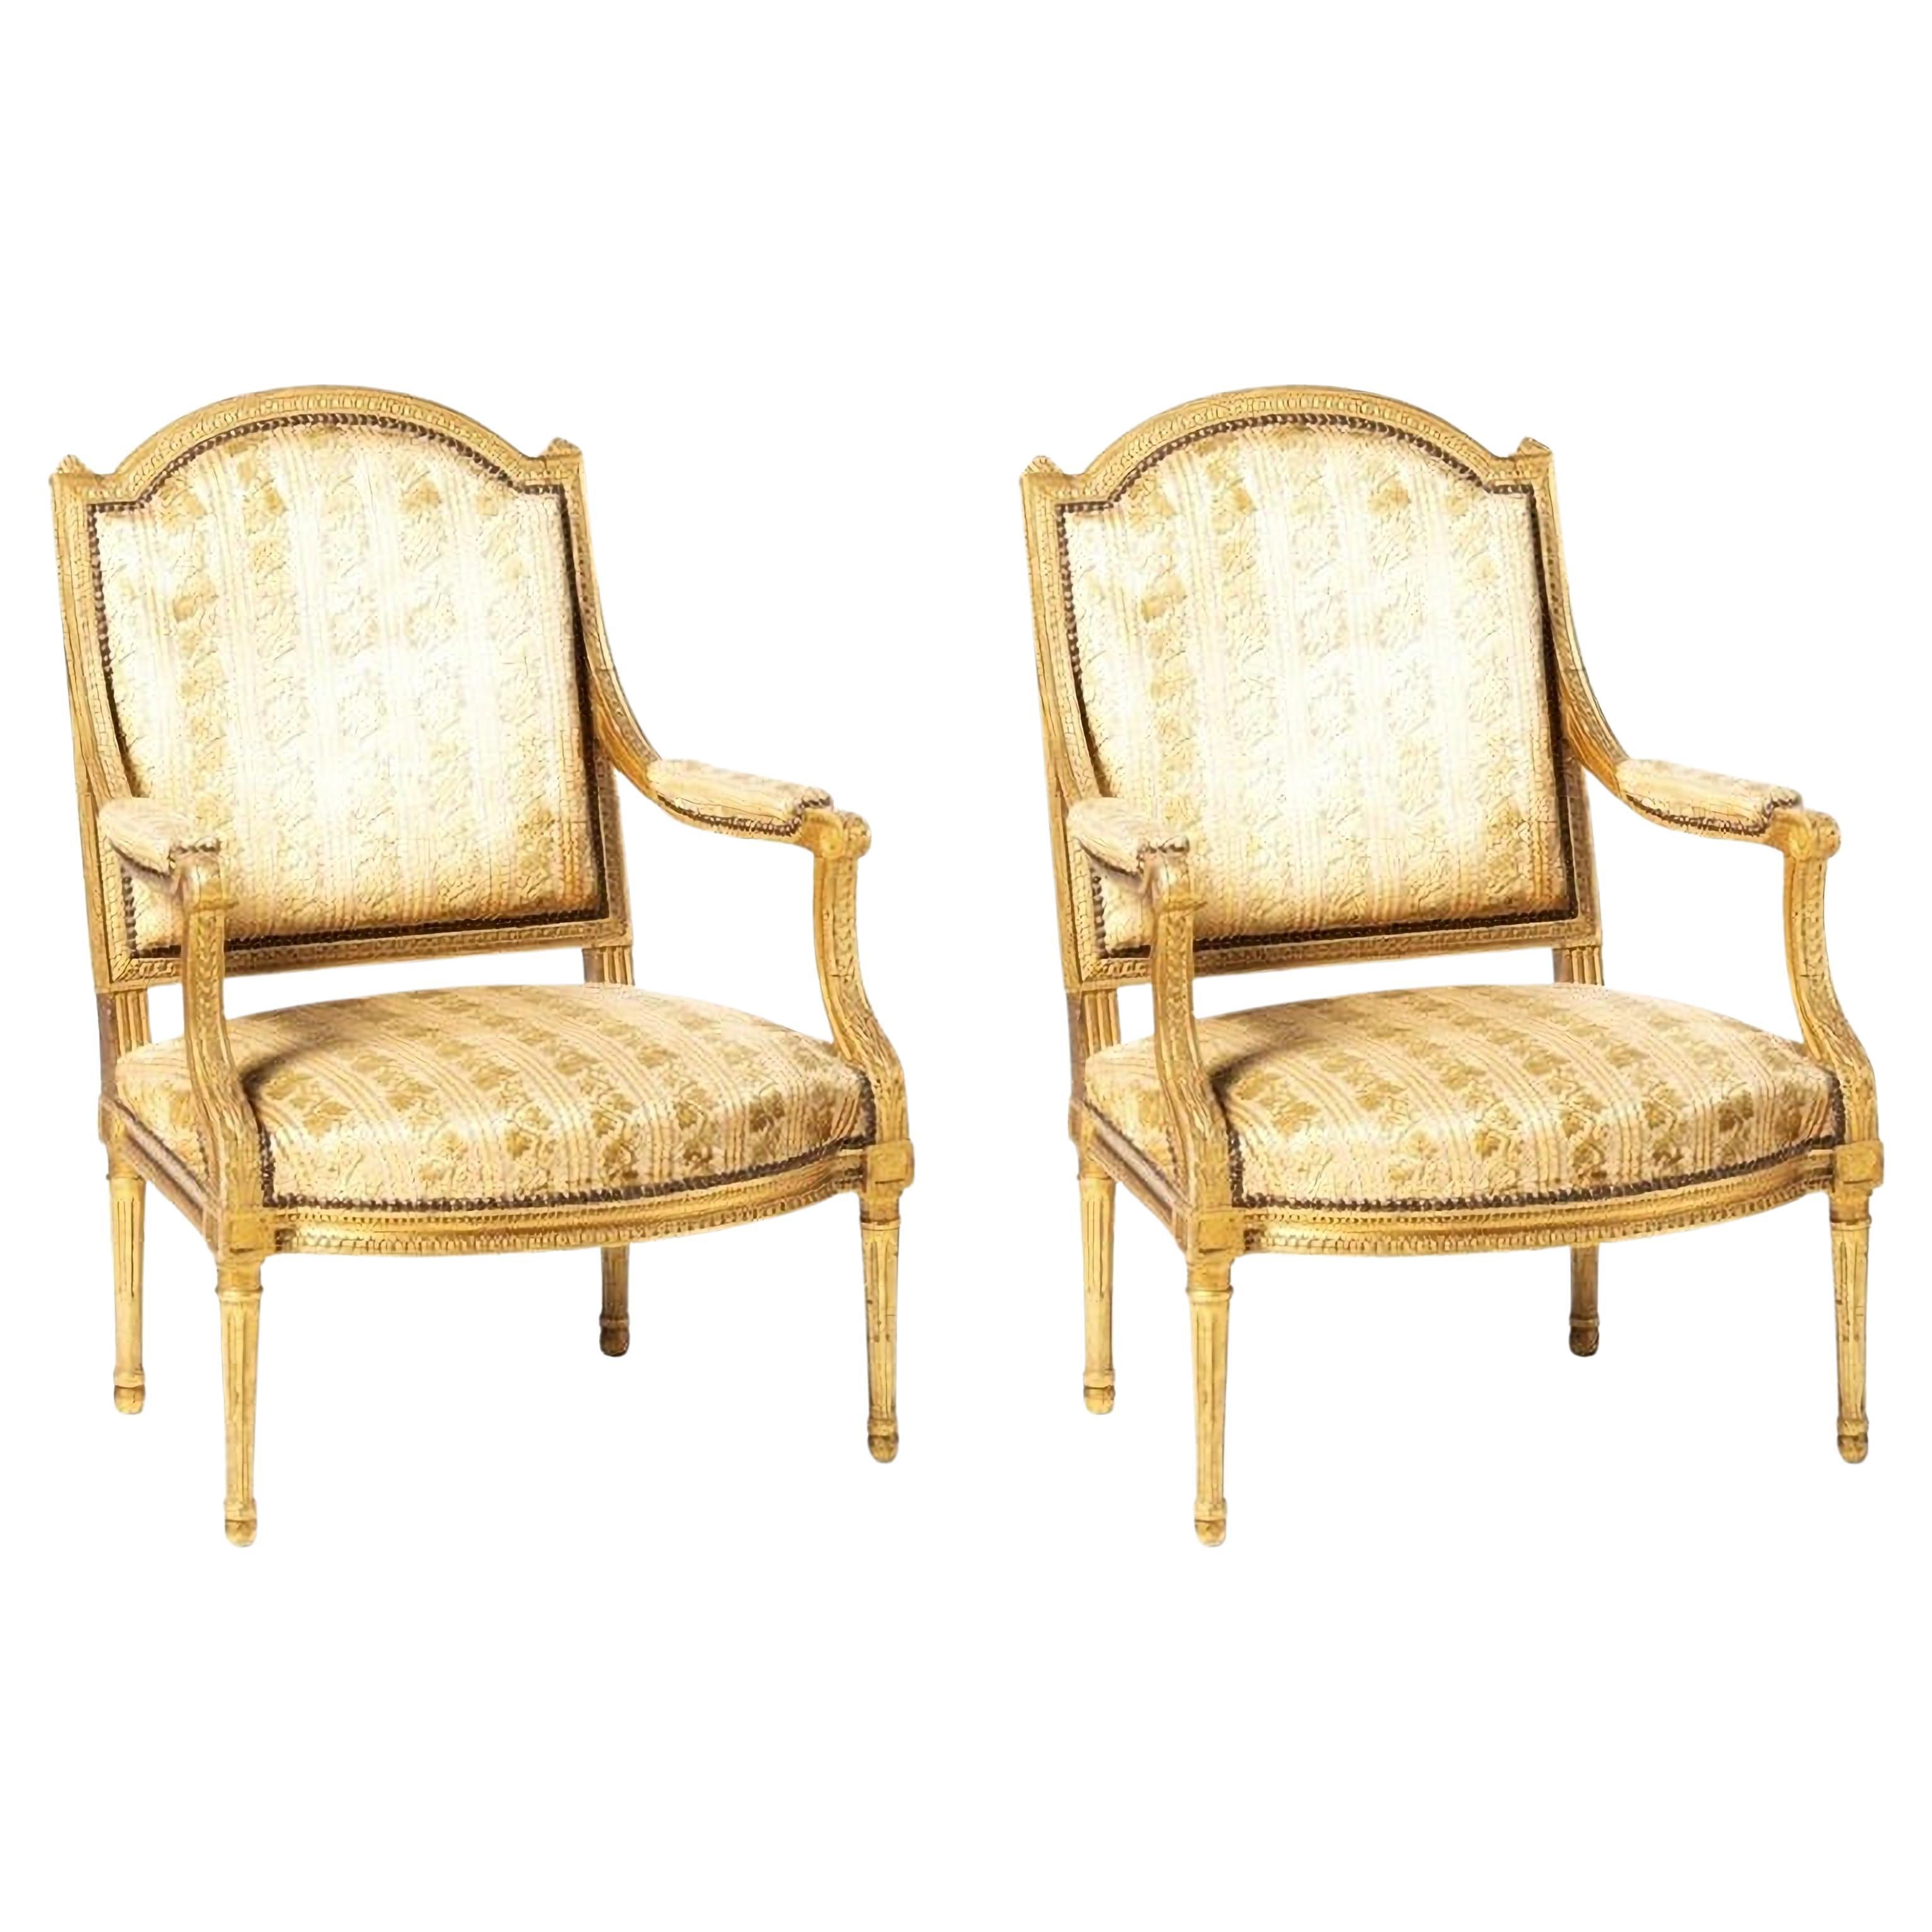 Pair of French Louis XVI Style Fauteuils, 19th Century